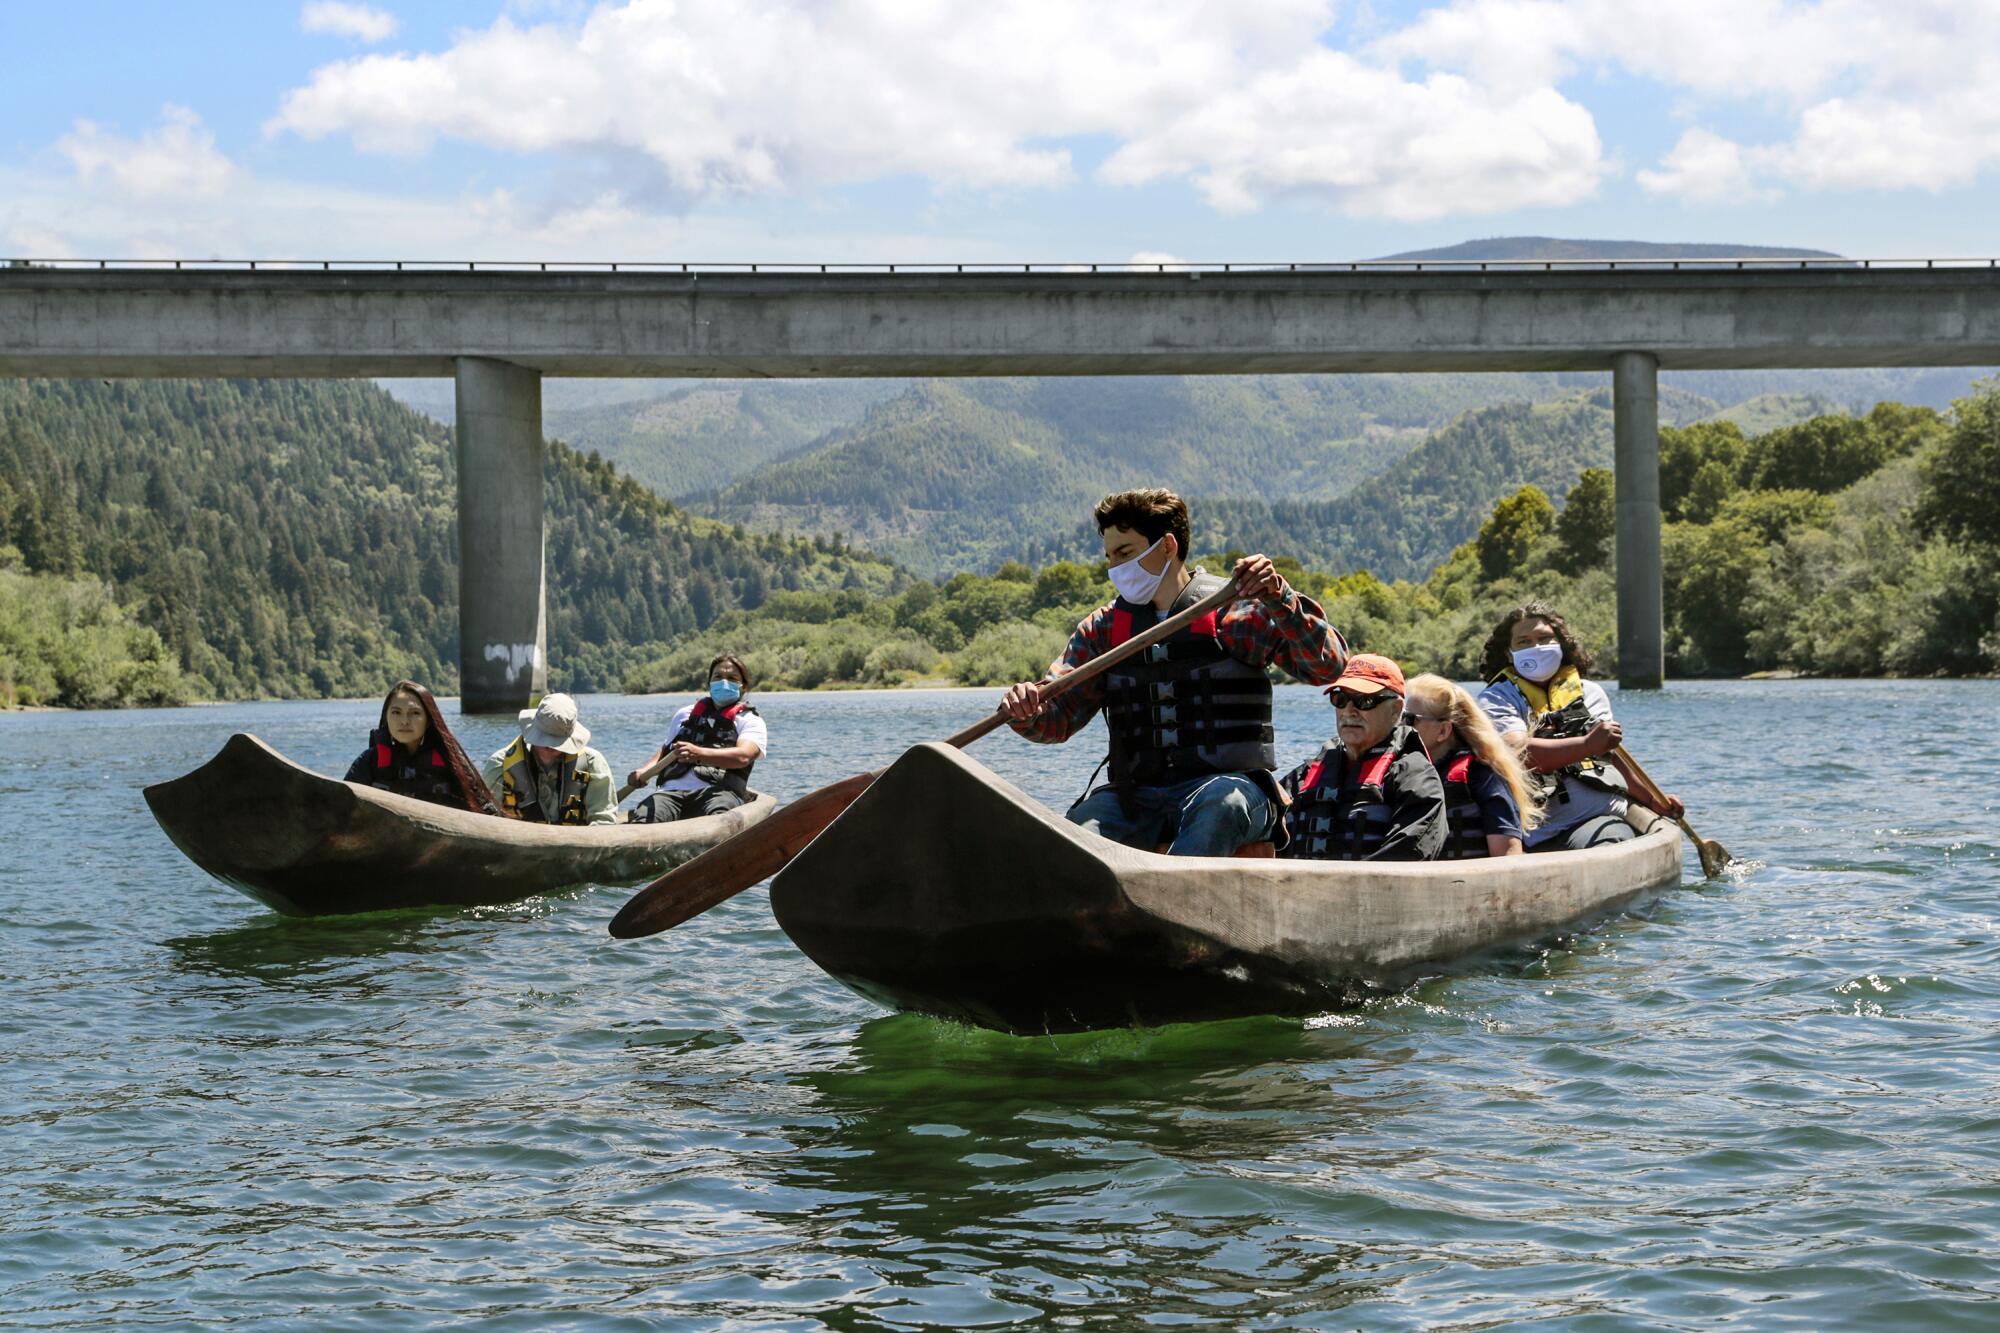 Boaters in dugout canoes pass near a bridge over a forested lake